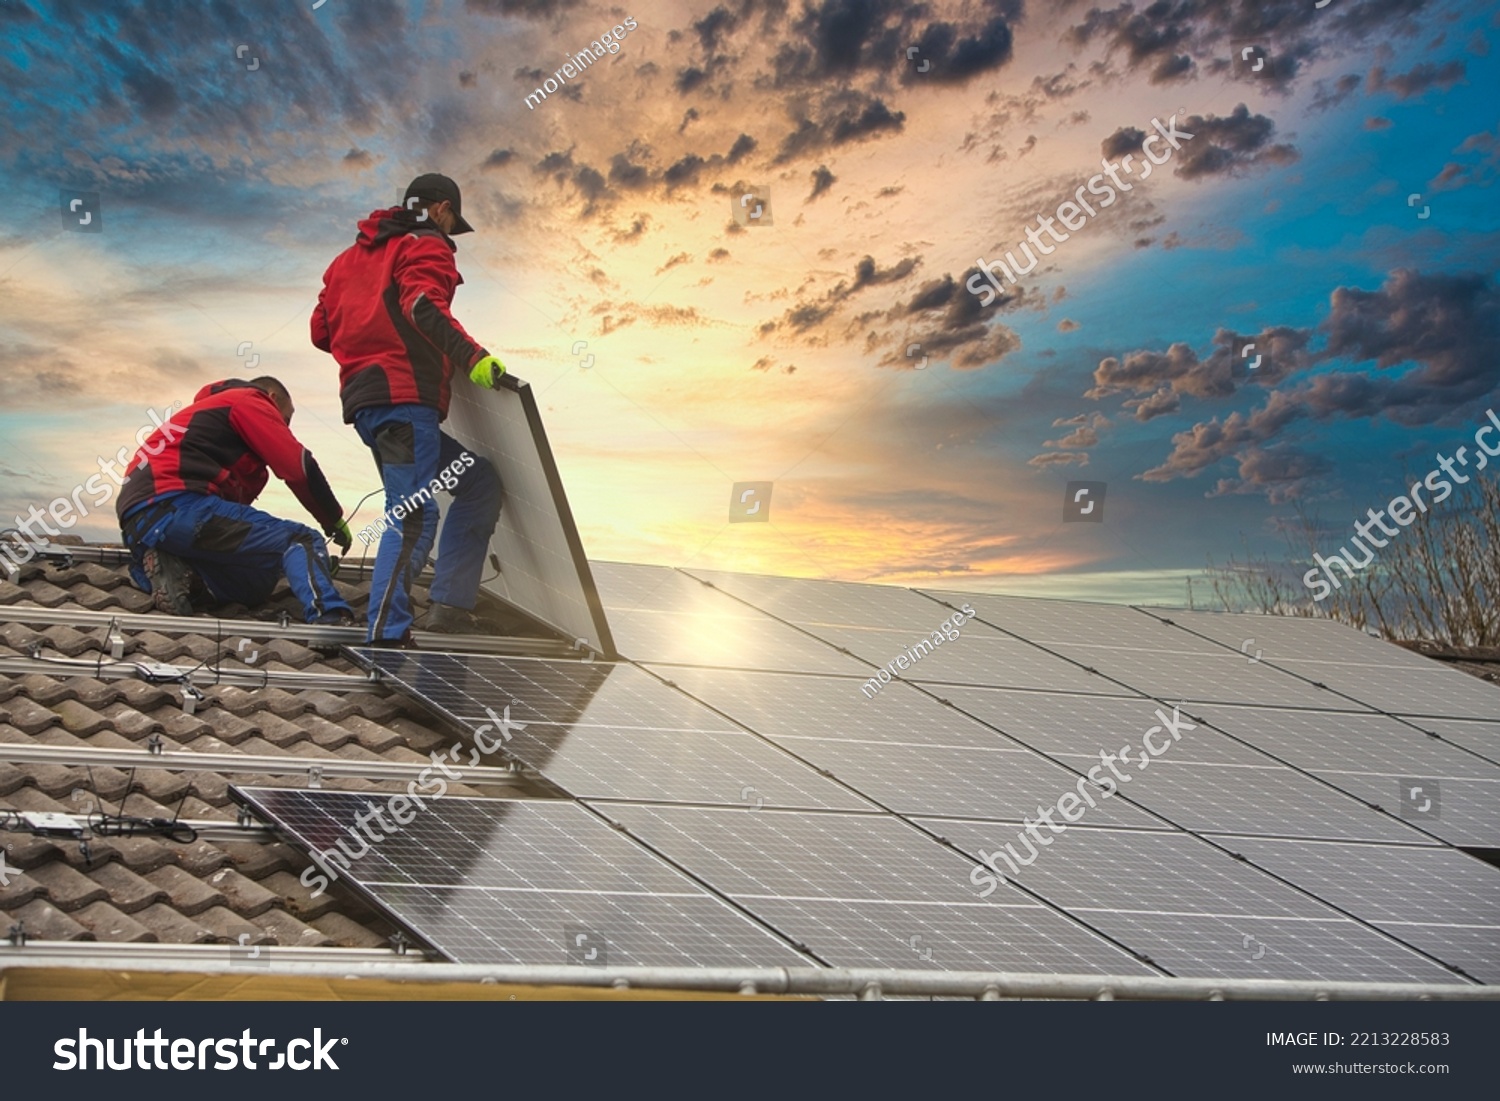 Installing solar photovoltaic panel system. Solar panel technician installing solar panels on roof. Alternative energy ecological concept.
 #2213228583